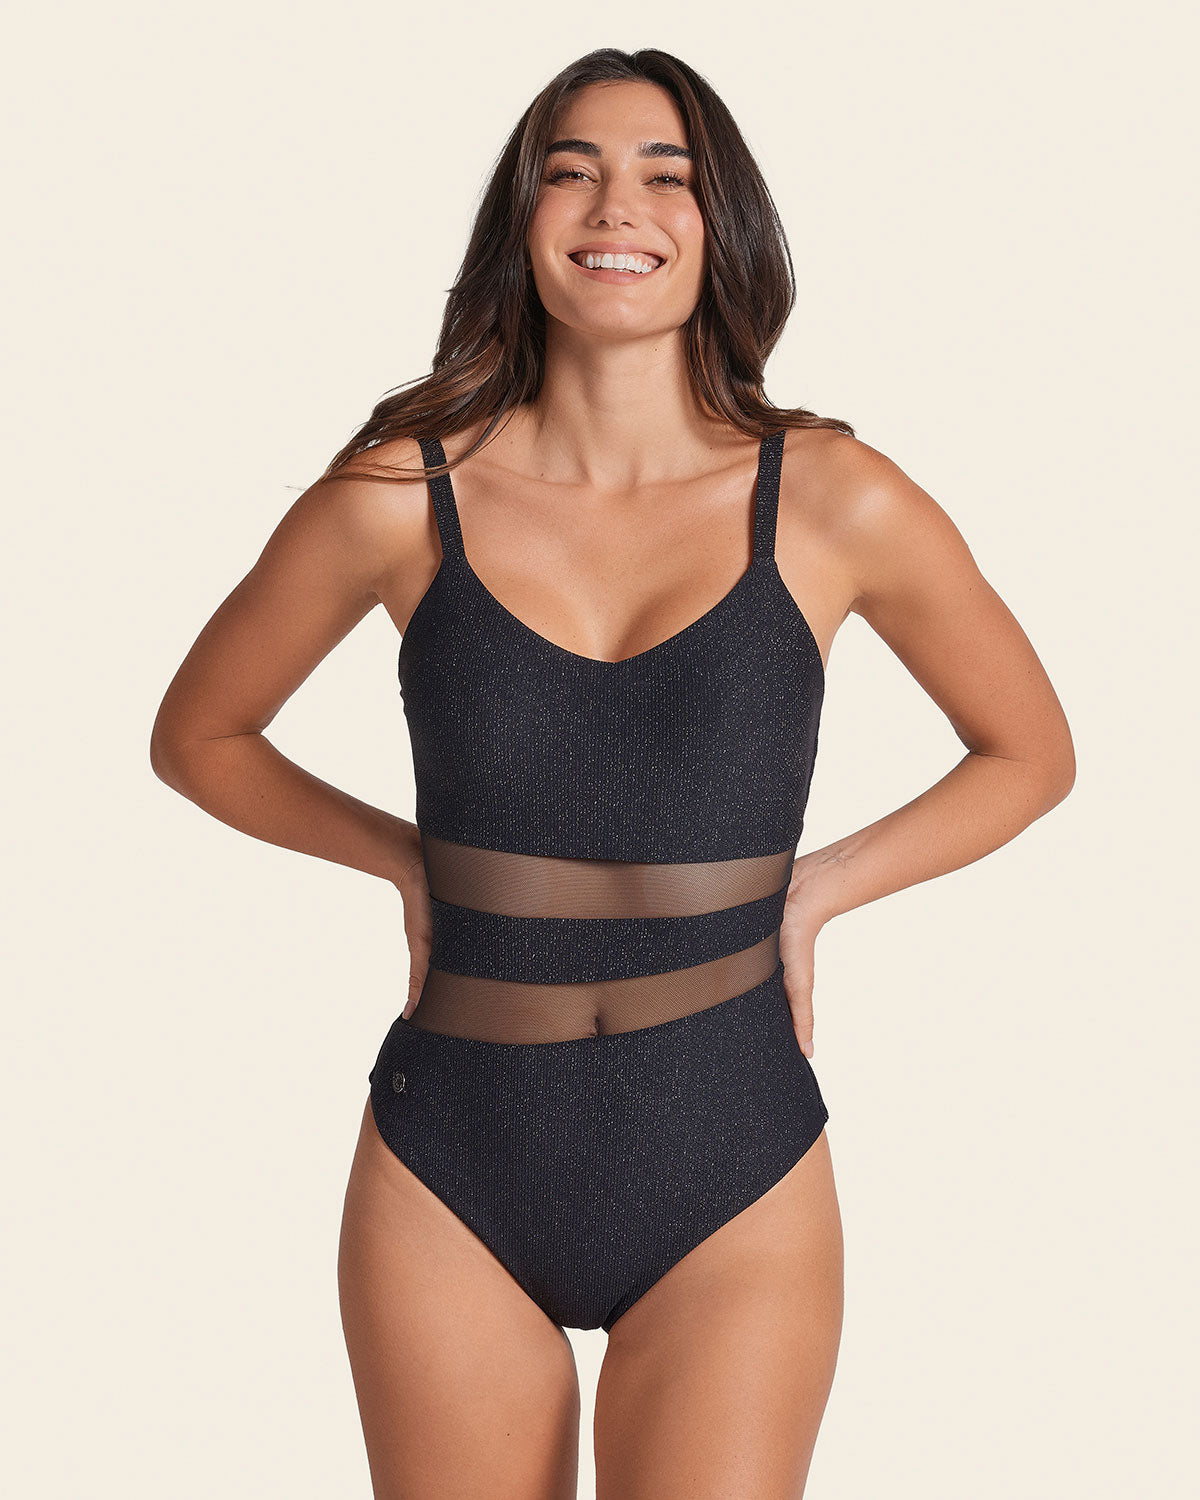 One-Piece Slimming Swimsuit in Shiny Fabric with Sheer Cutouts